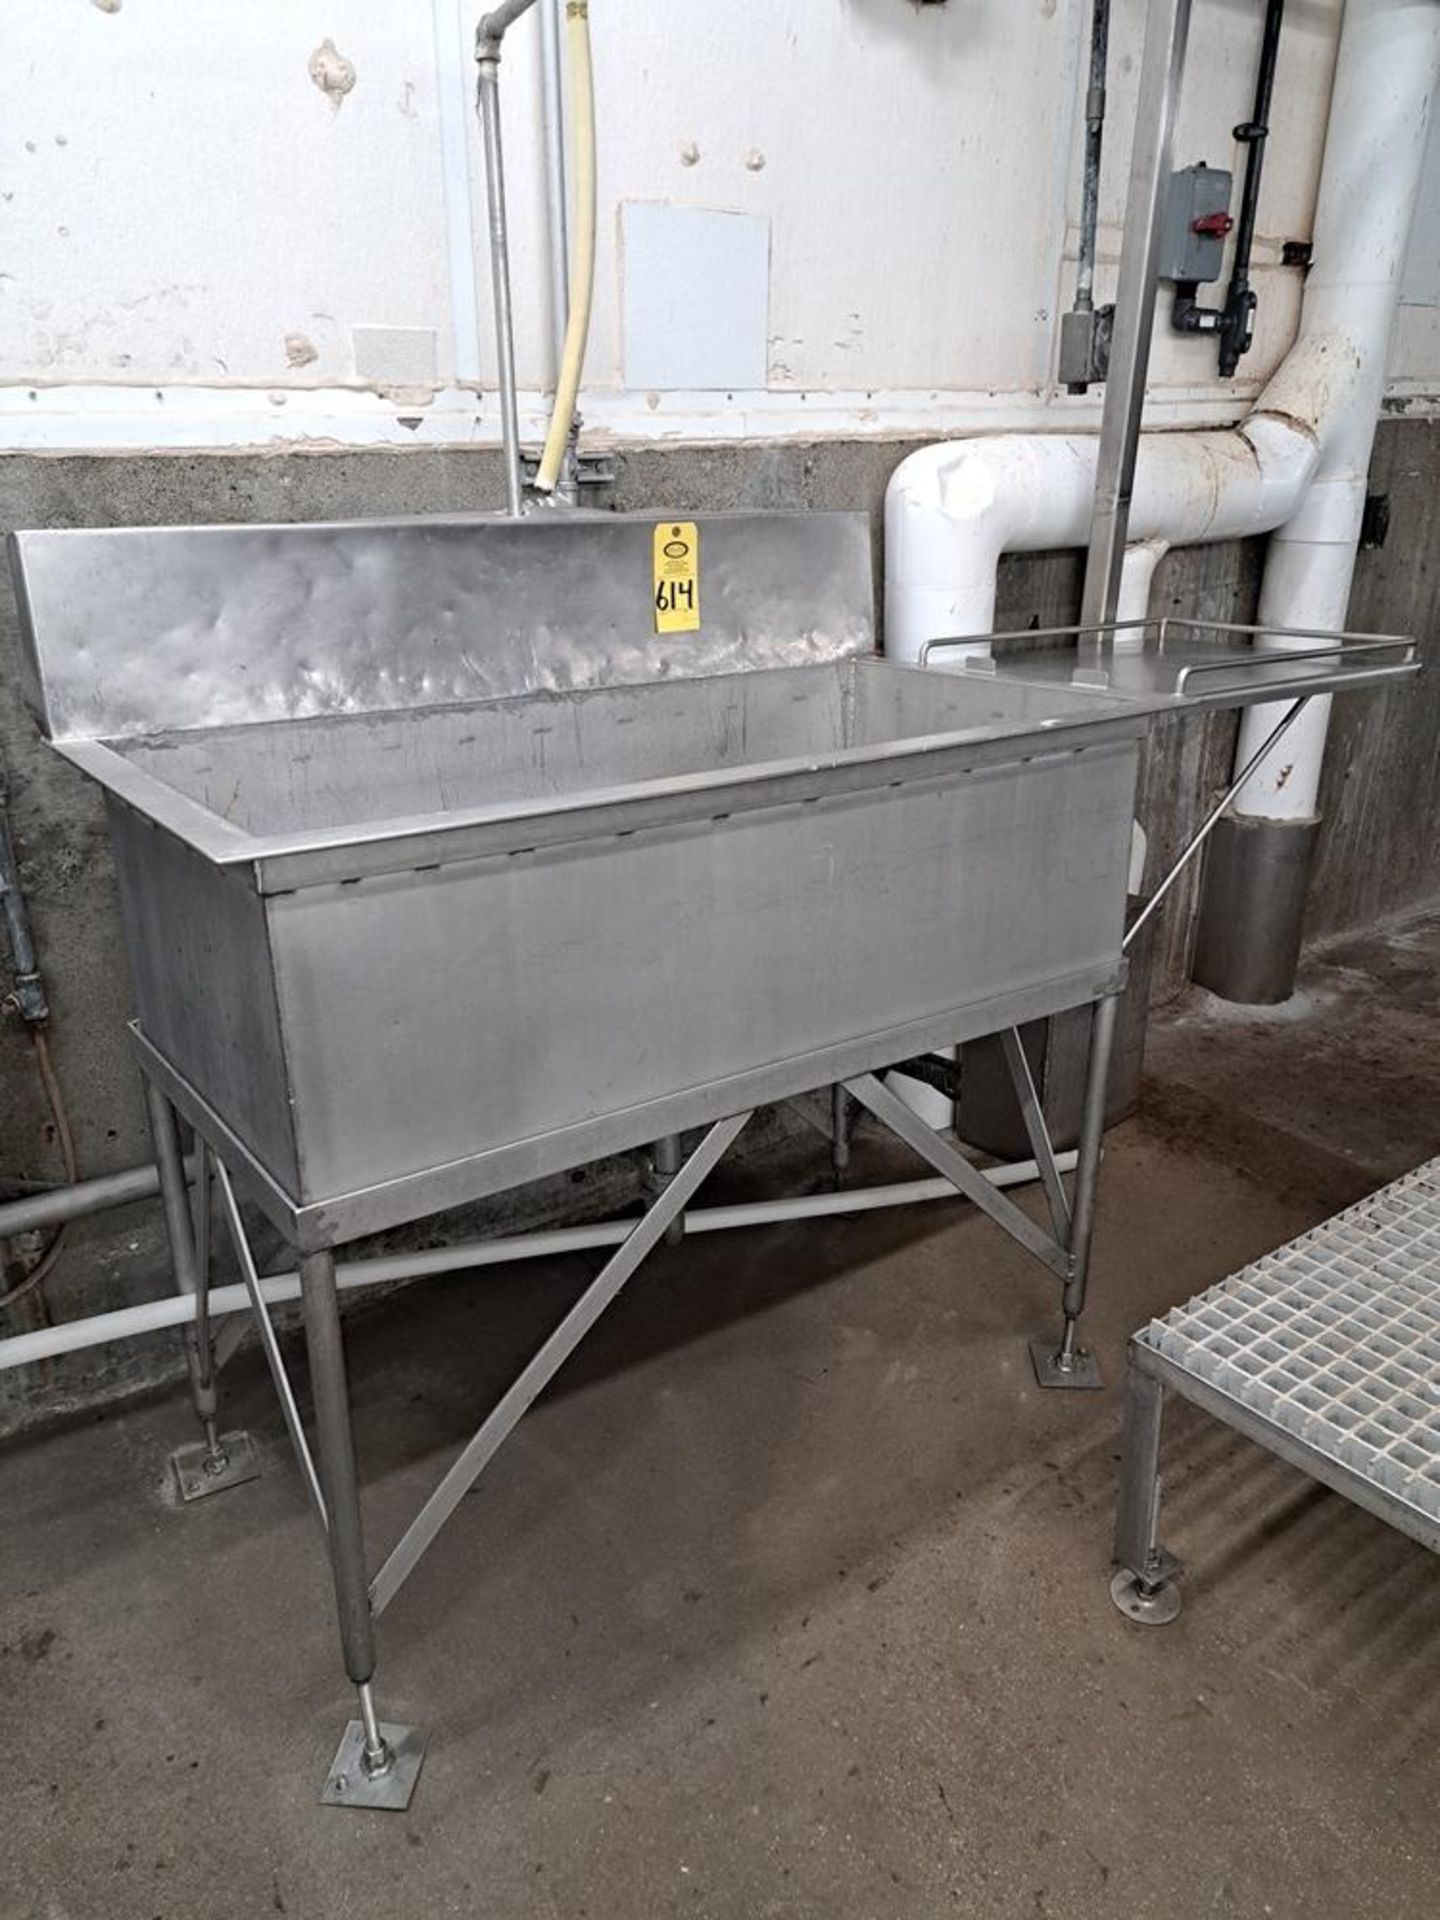 Stainless Steel Basin, 24" W X 4' L X 16" D side board: Required Loading Fee $200.00, Rigger-Norm